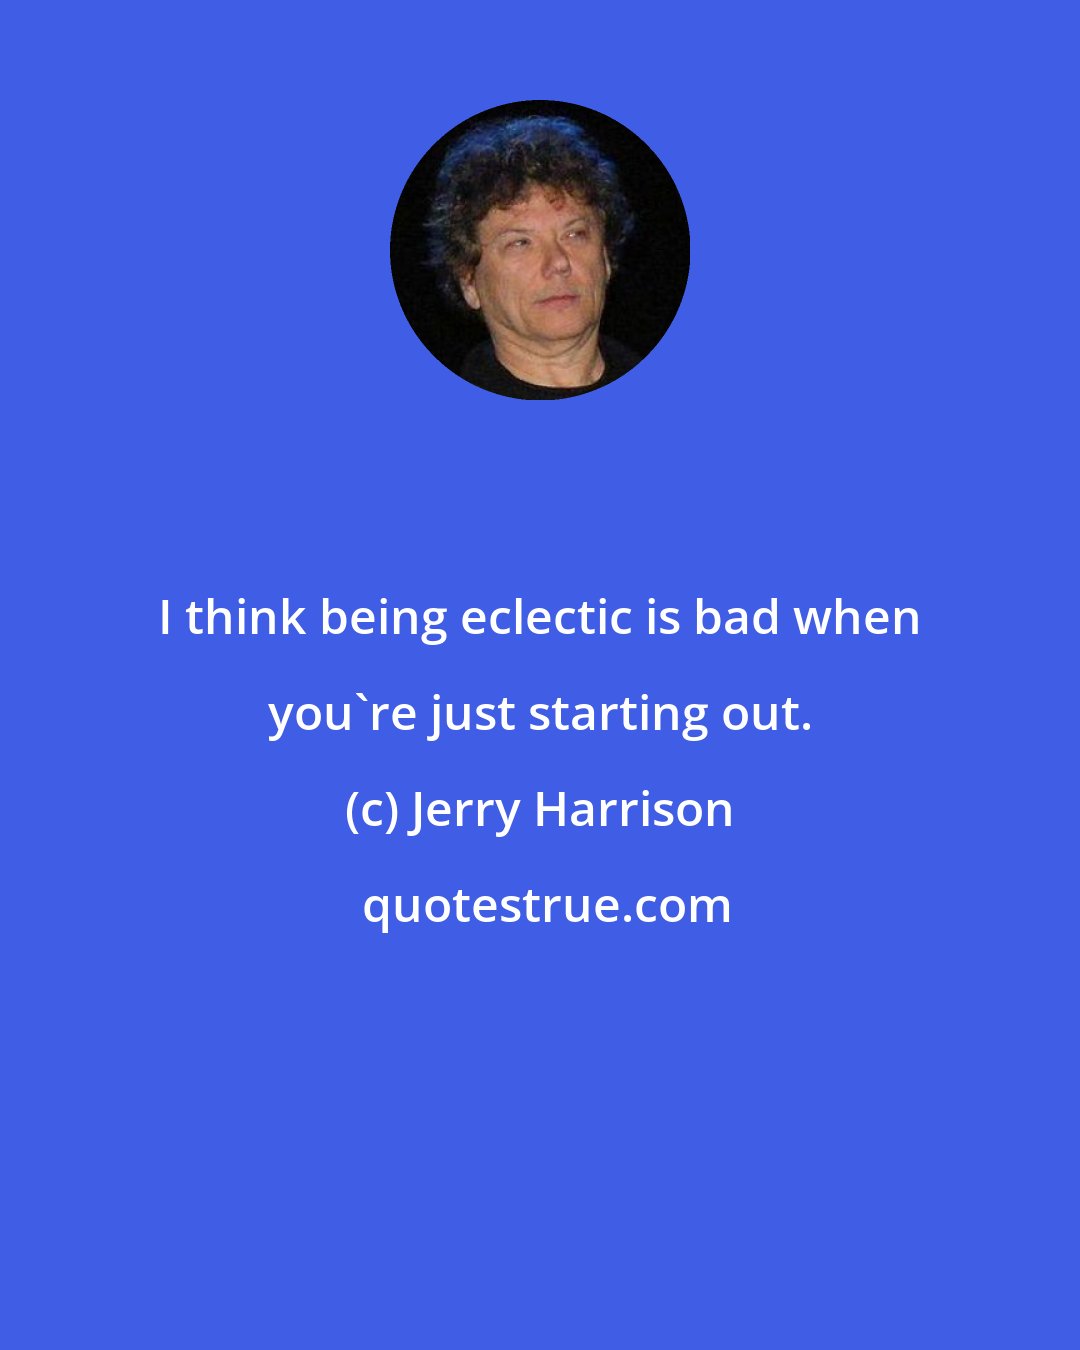 Jerry Harrison: I think being eclectic is bad when you're just starting out.